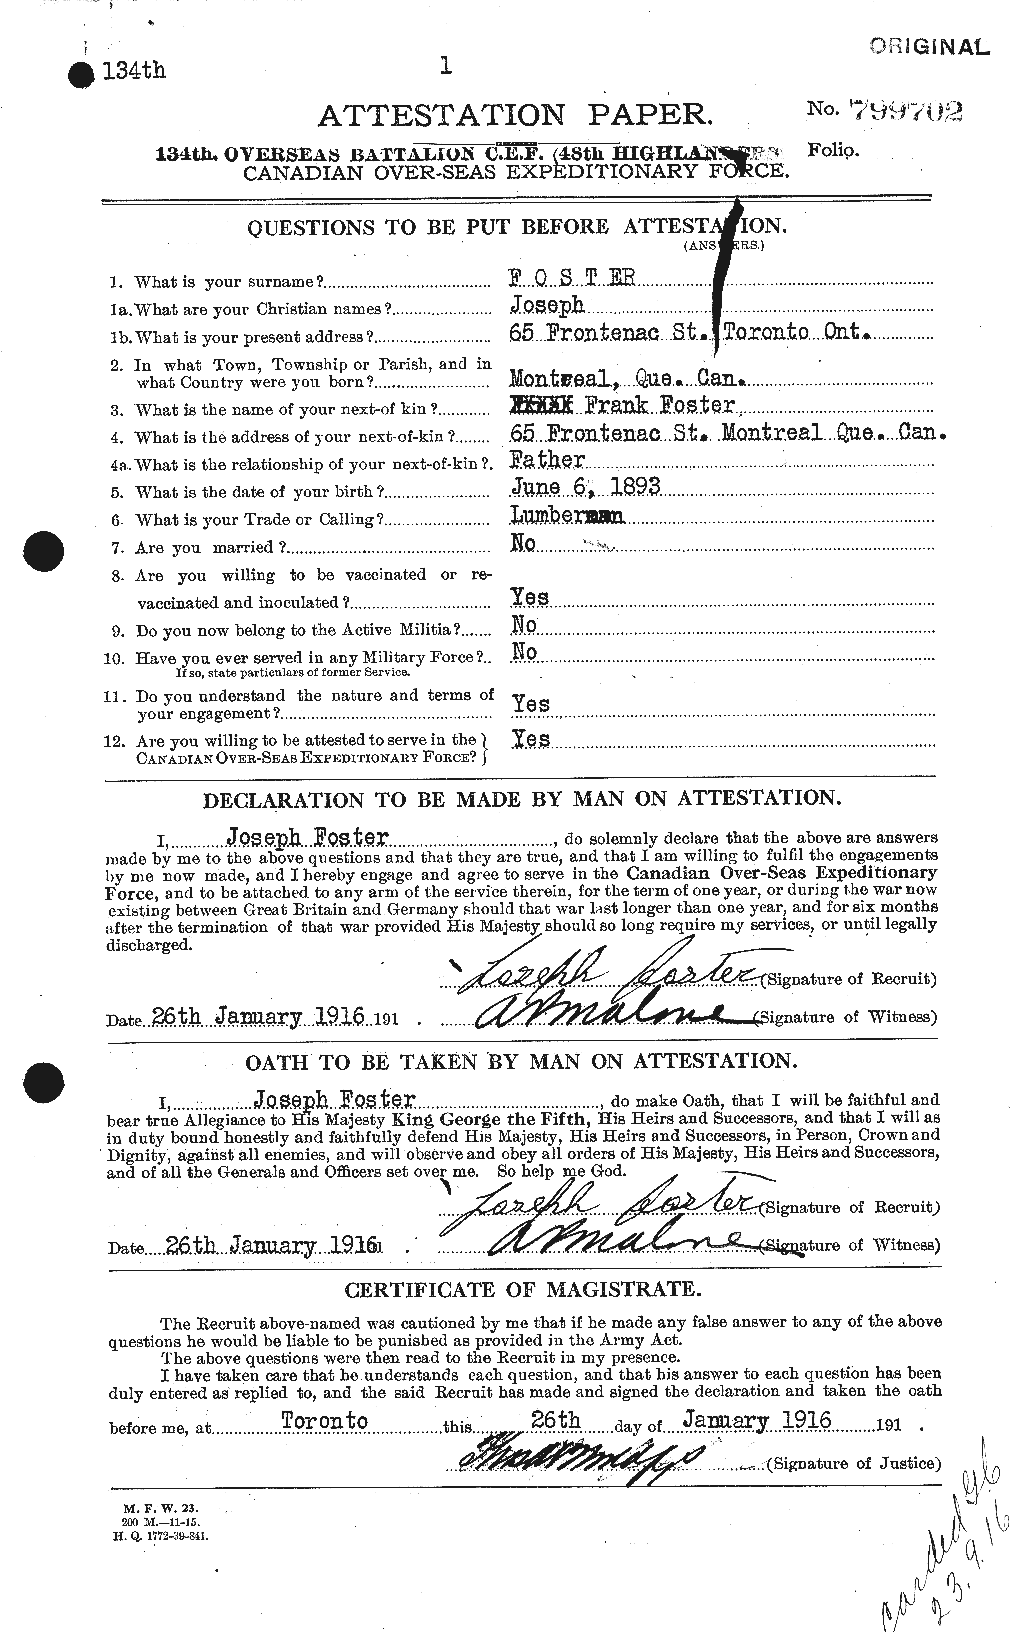 Personnel Records of the First World War - CEF 333377a